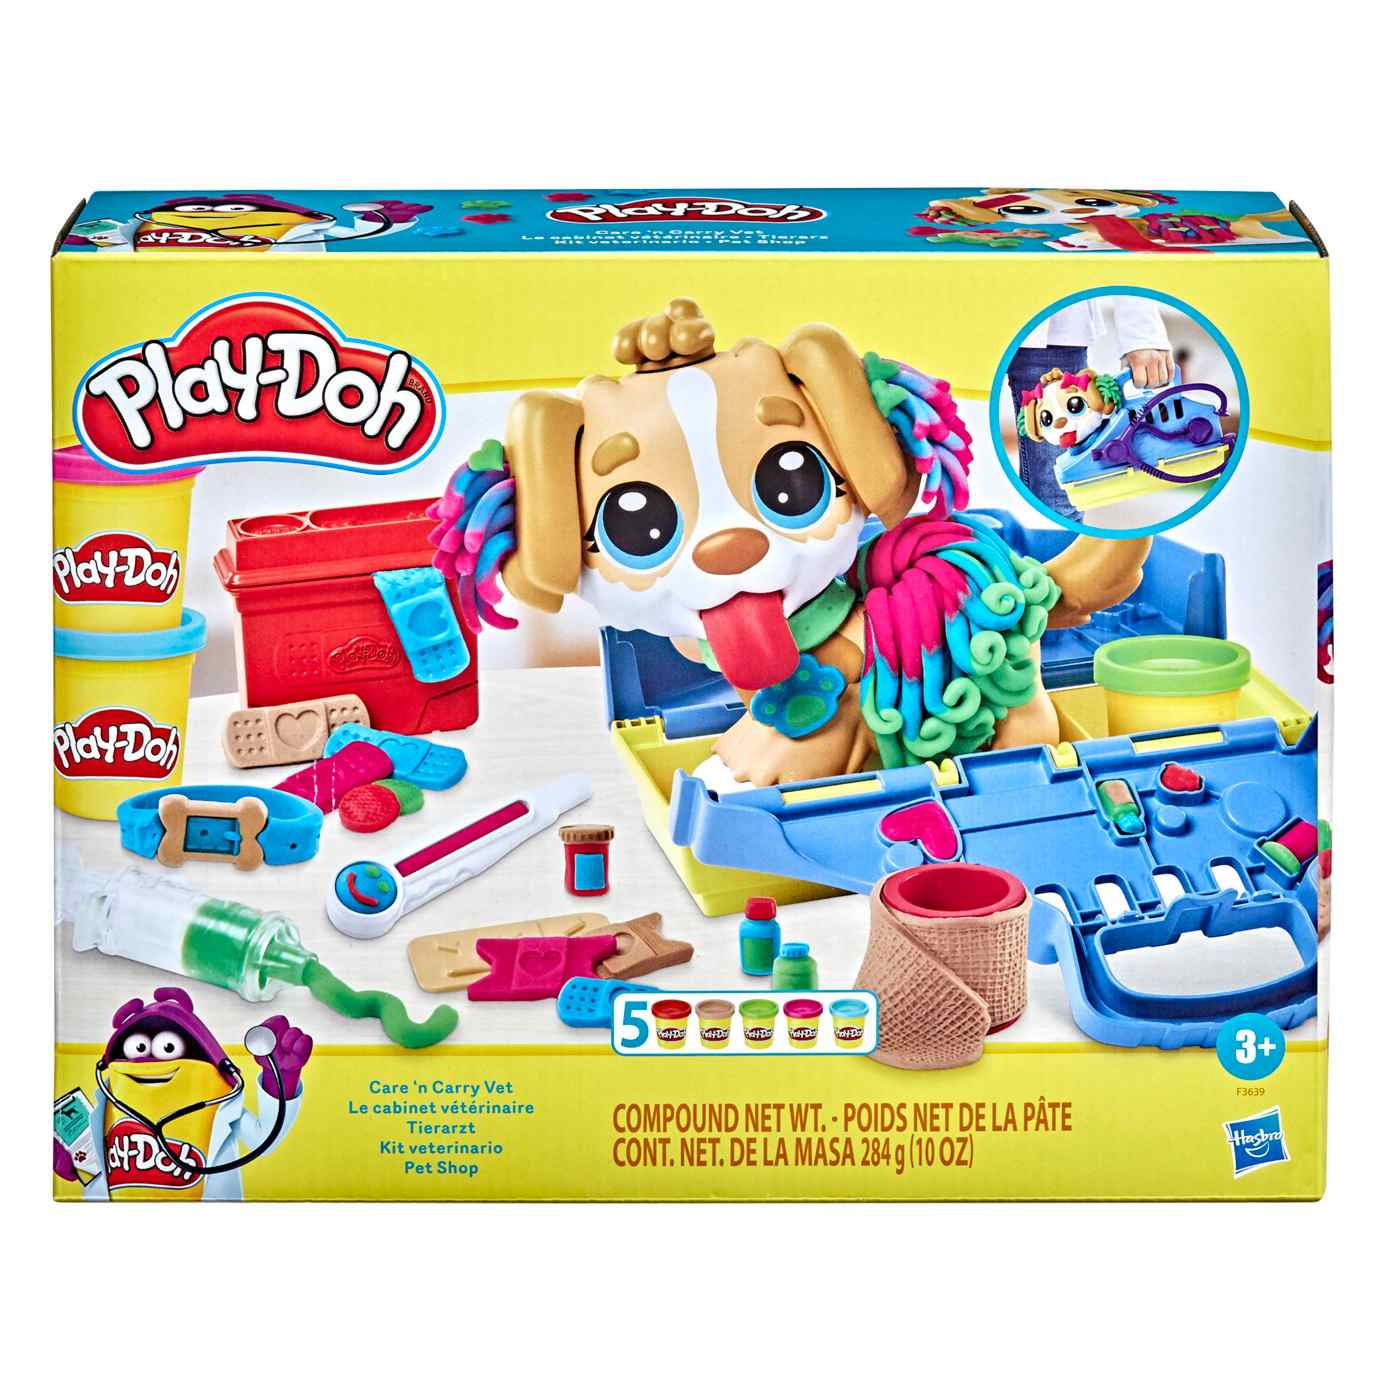 Play-Doh Care 'n Carry Vet Playset; image 1 of 6